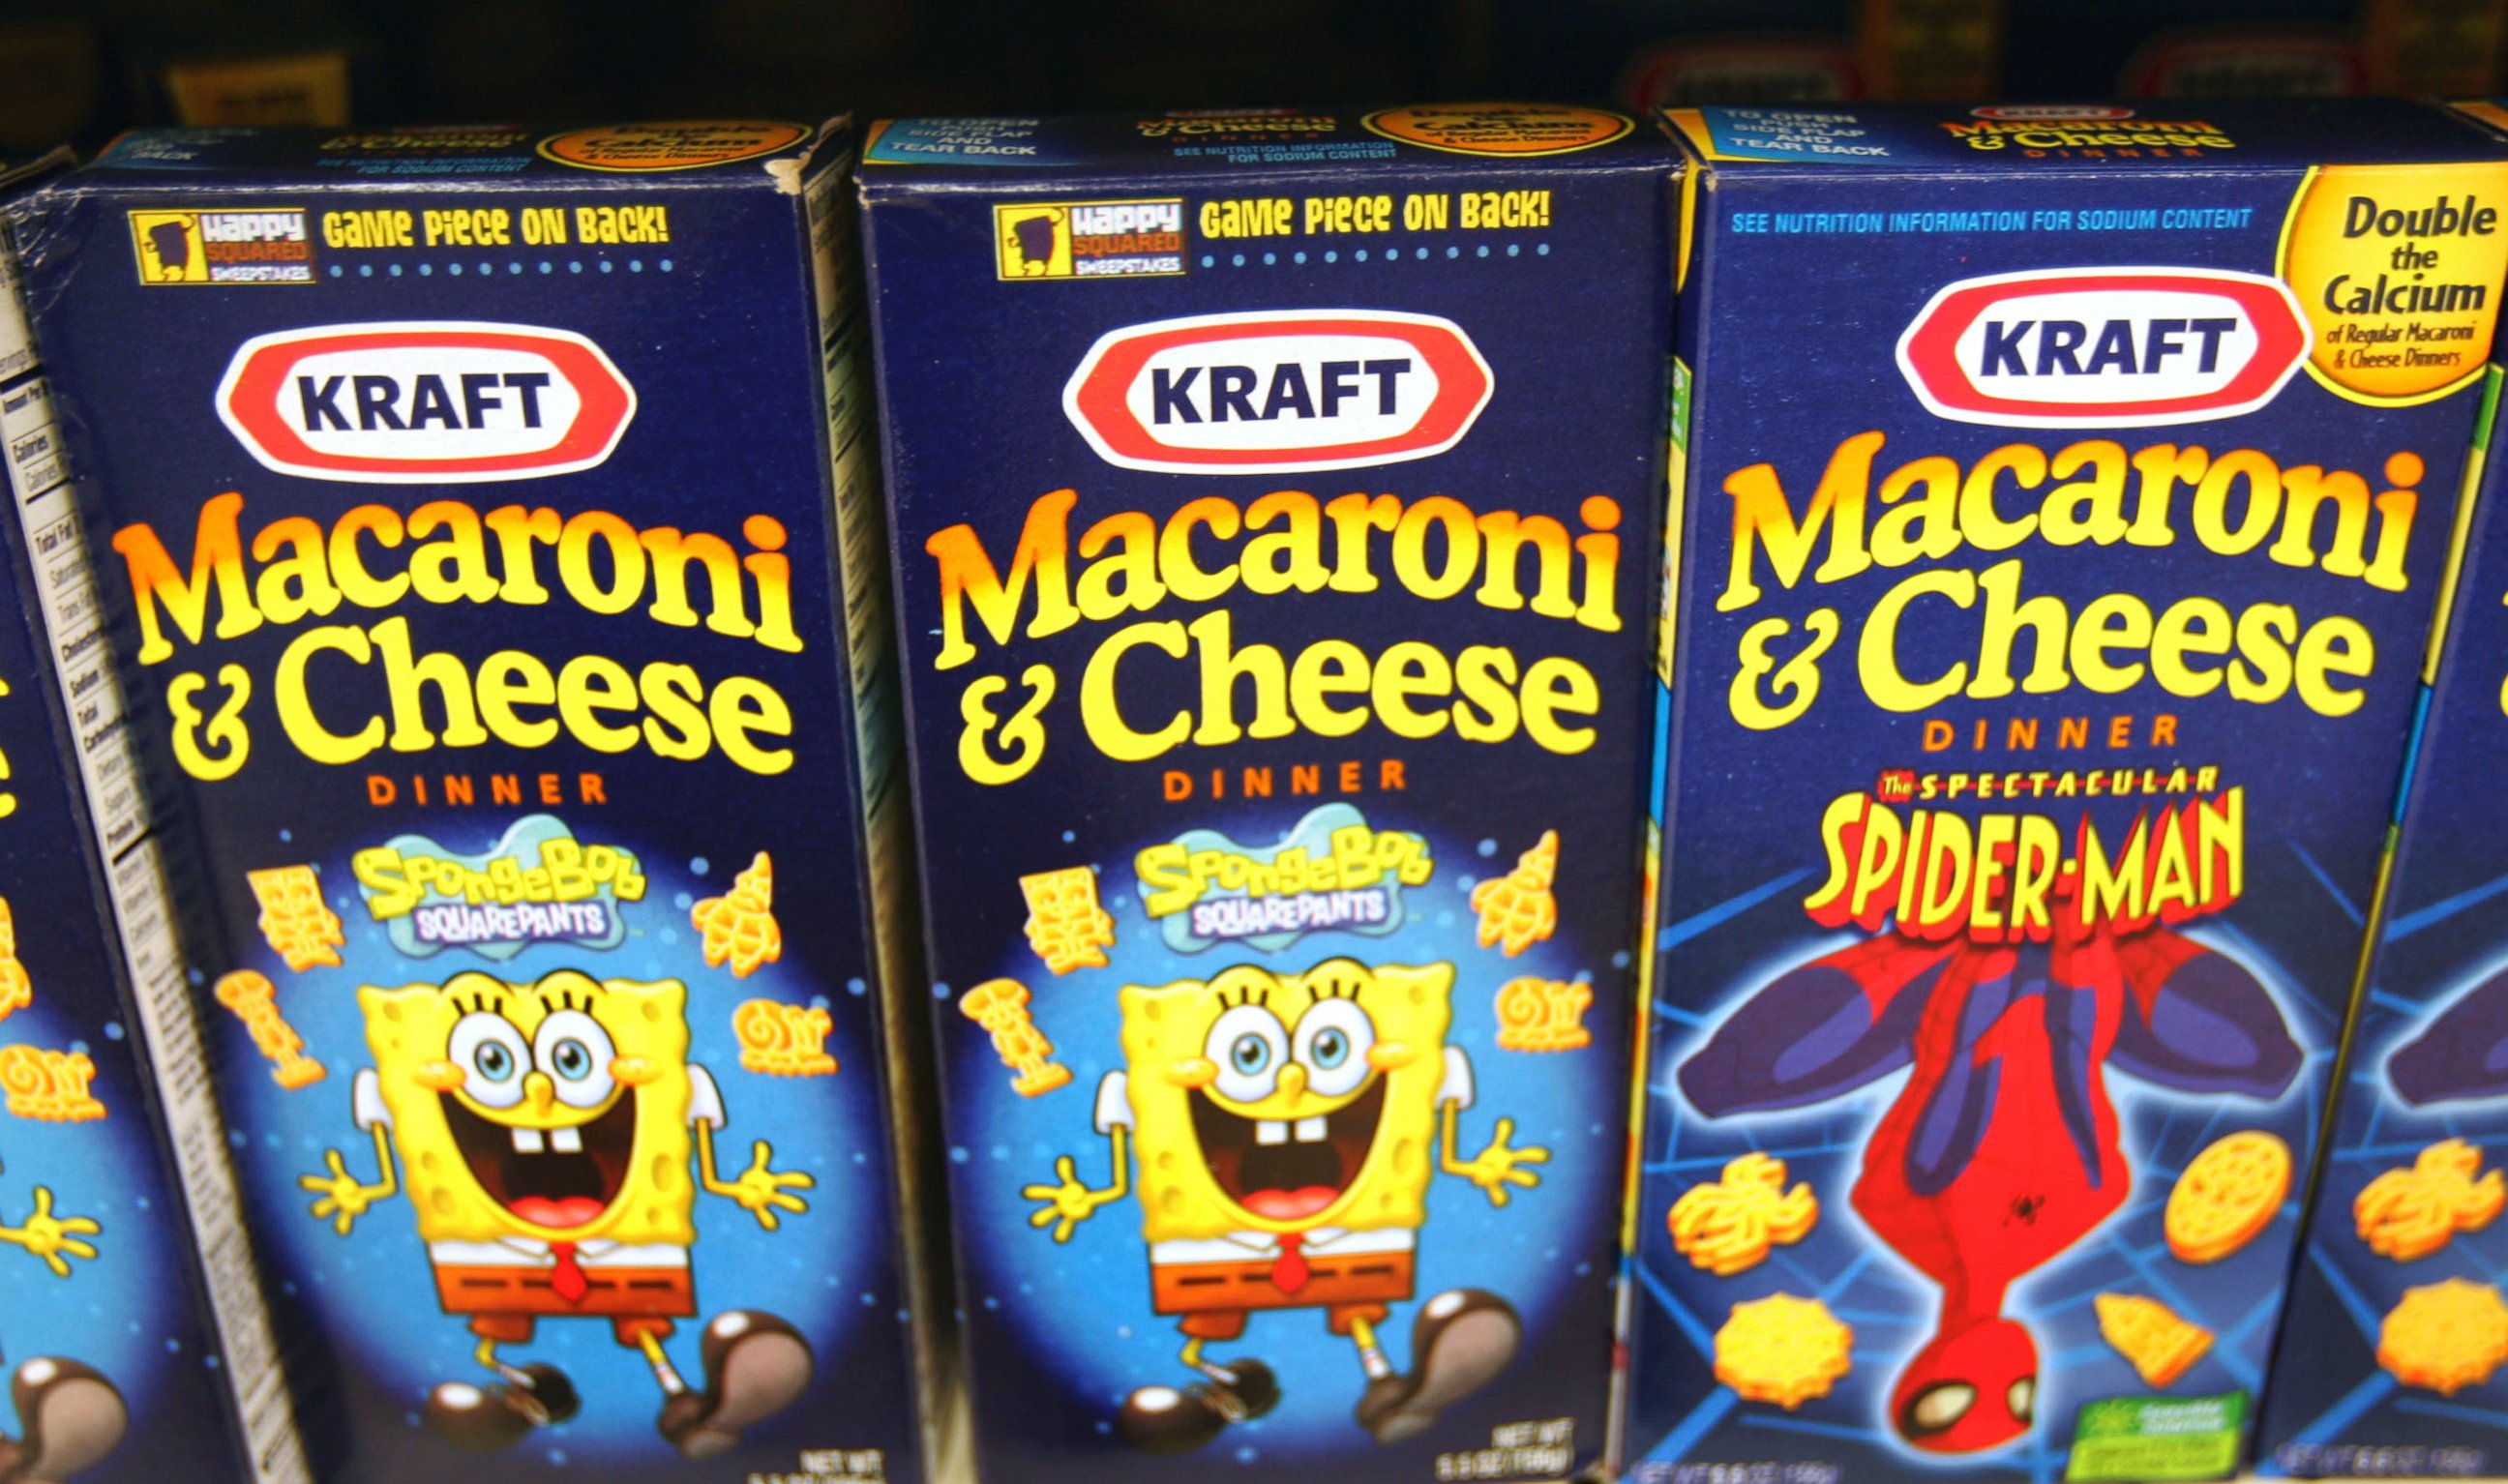 PHOTO: Boxes of Kraft Foods Inc. Macaroni & Cheese are pictured in Glenview, Ill. on Jan. 19, 2010. 